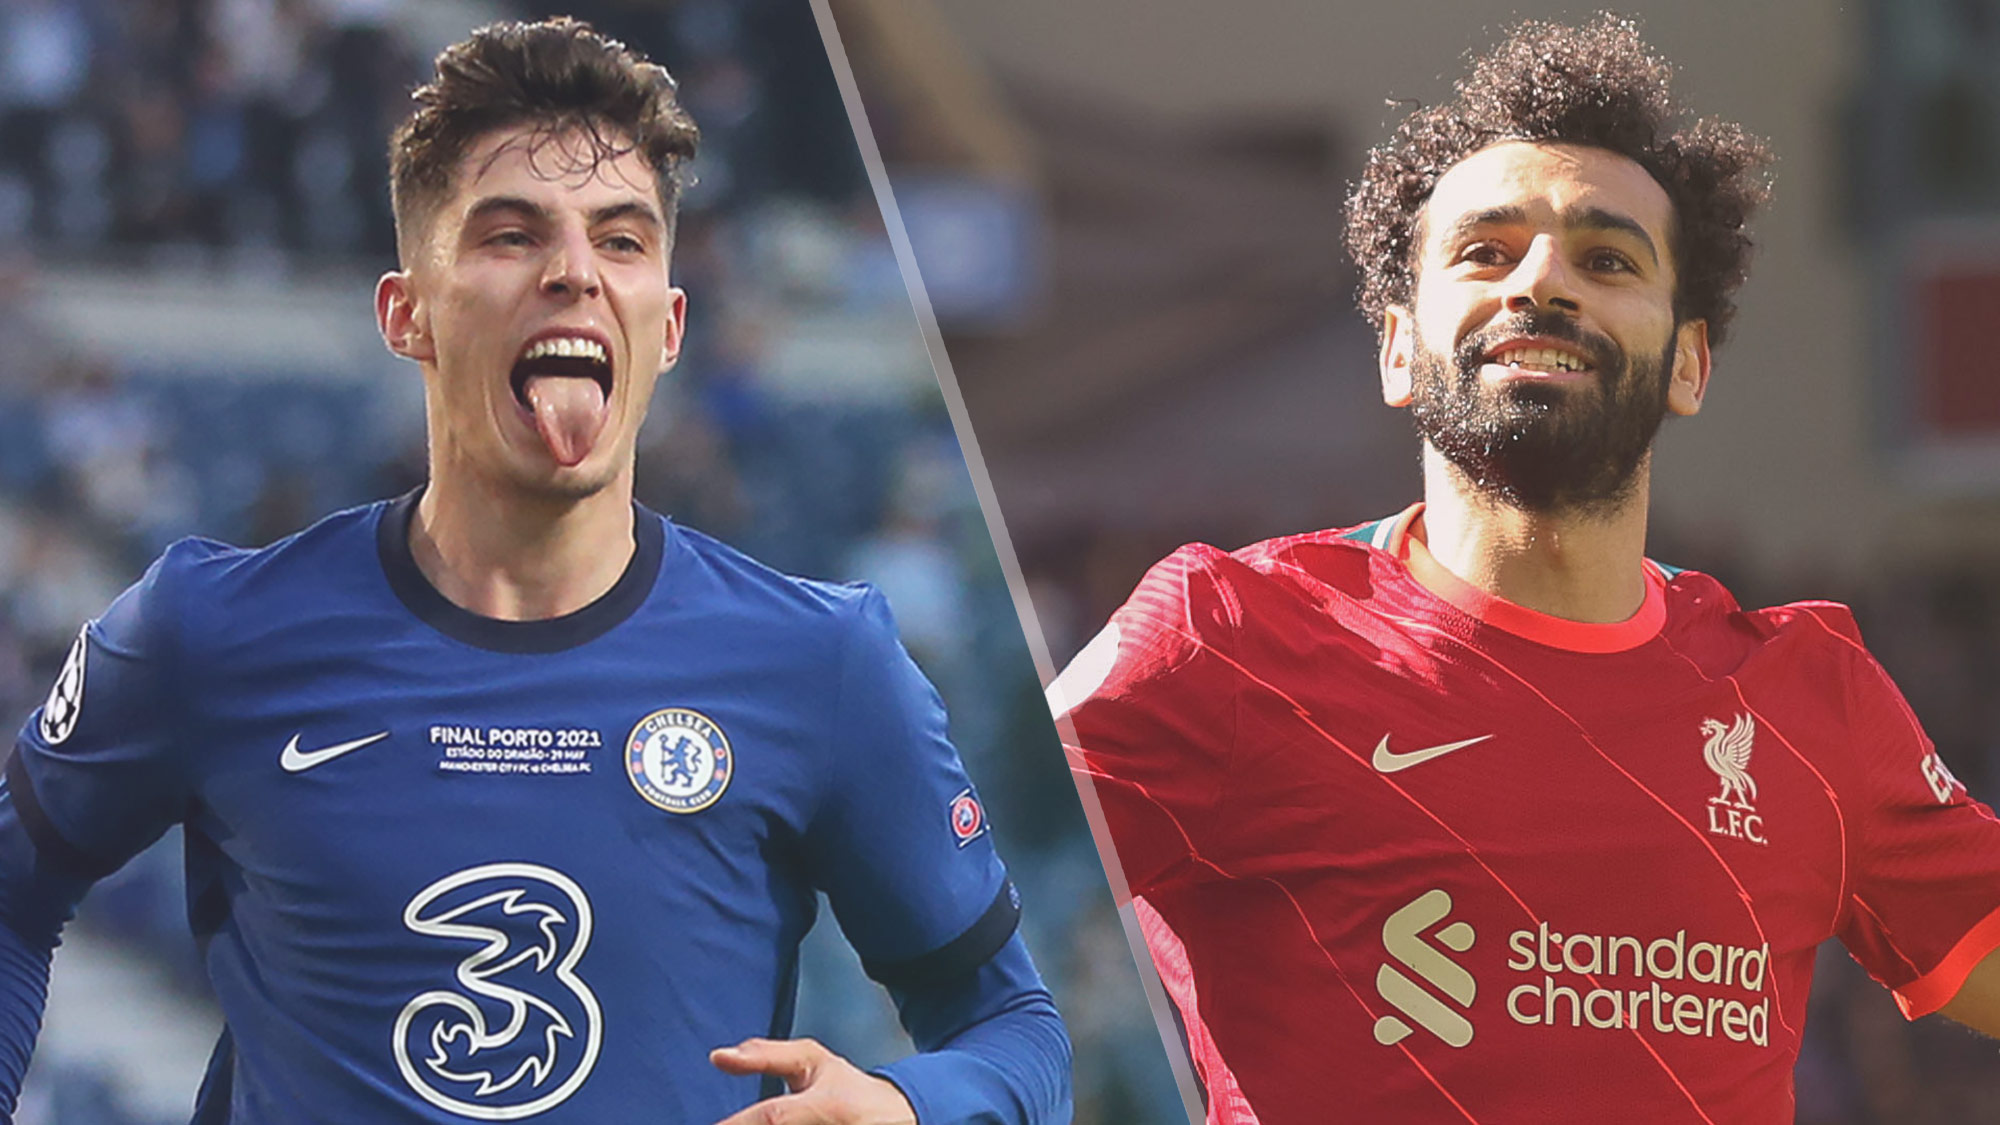 Chelsea vs Liverpool live stream — how to watch FA Cup final online